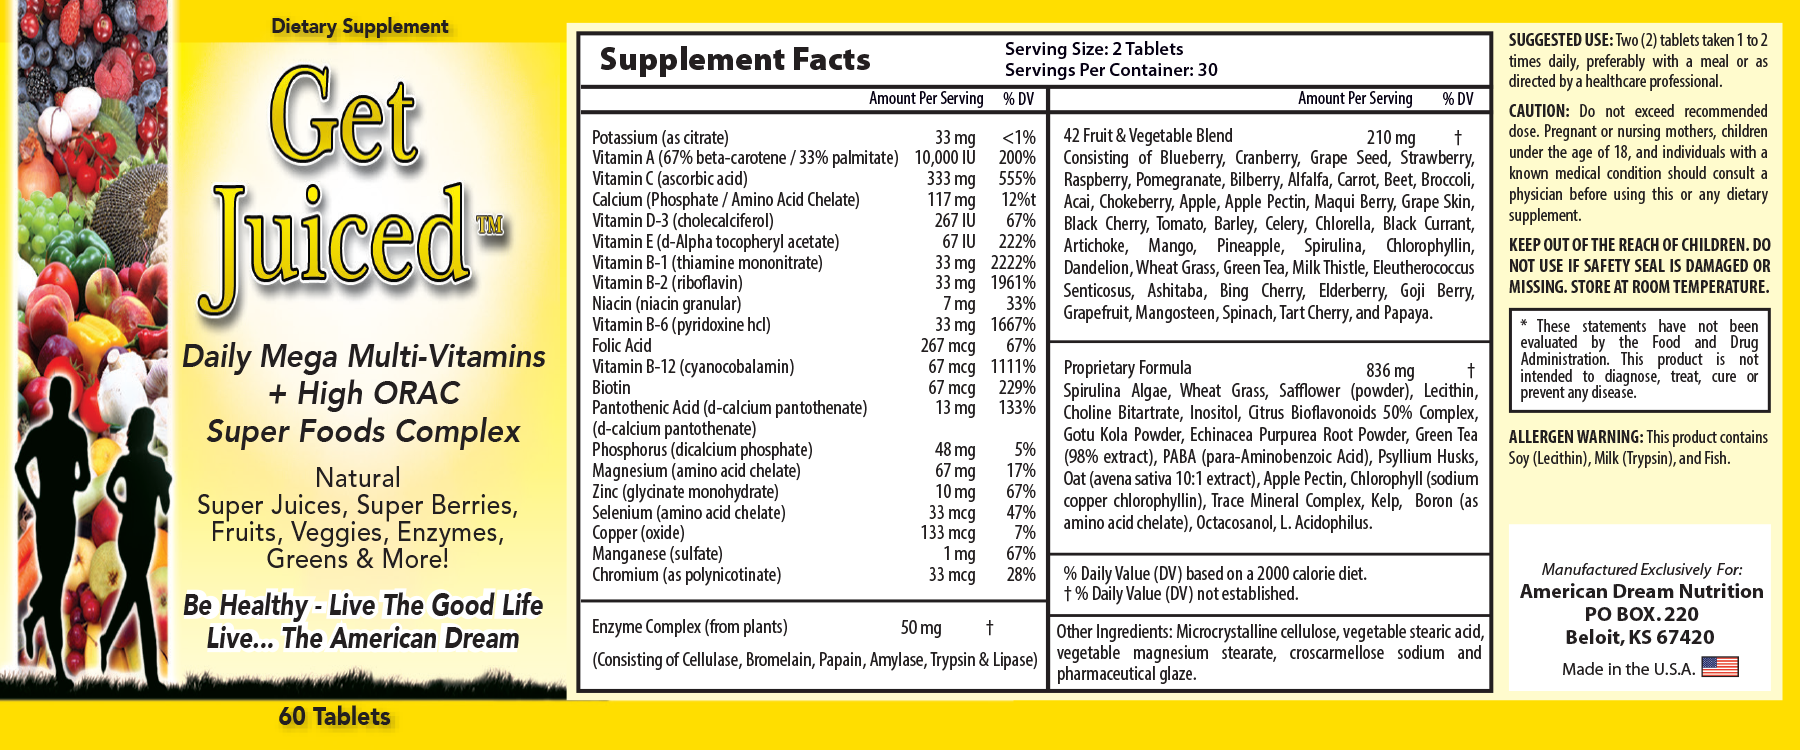 get-juiced-supplements-facts